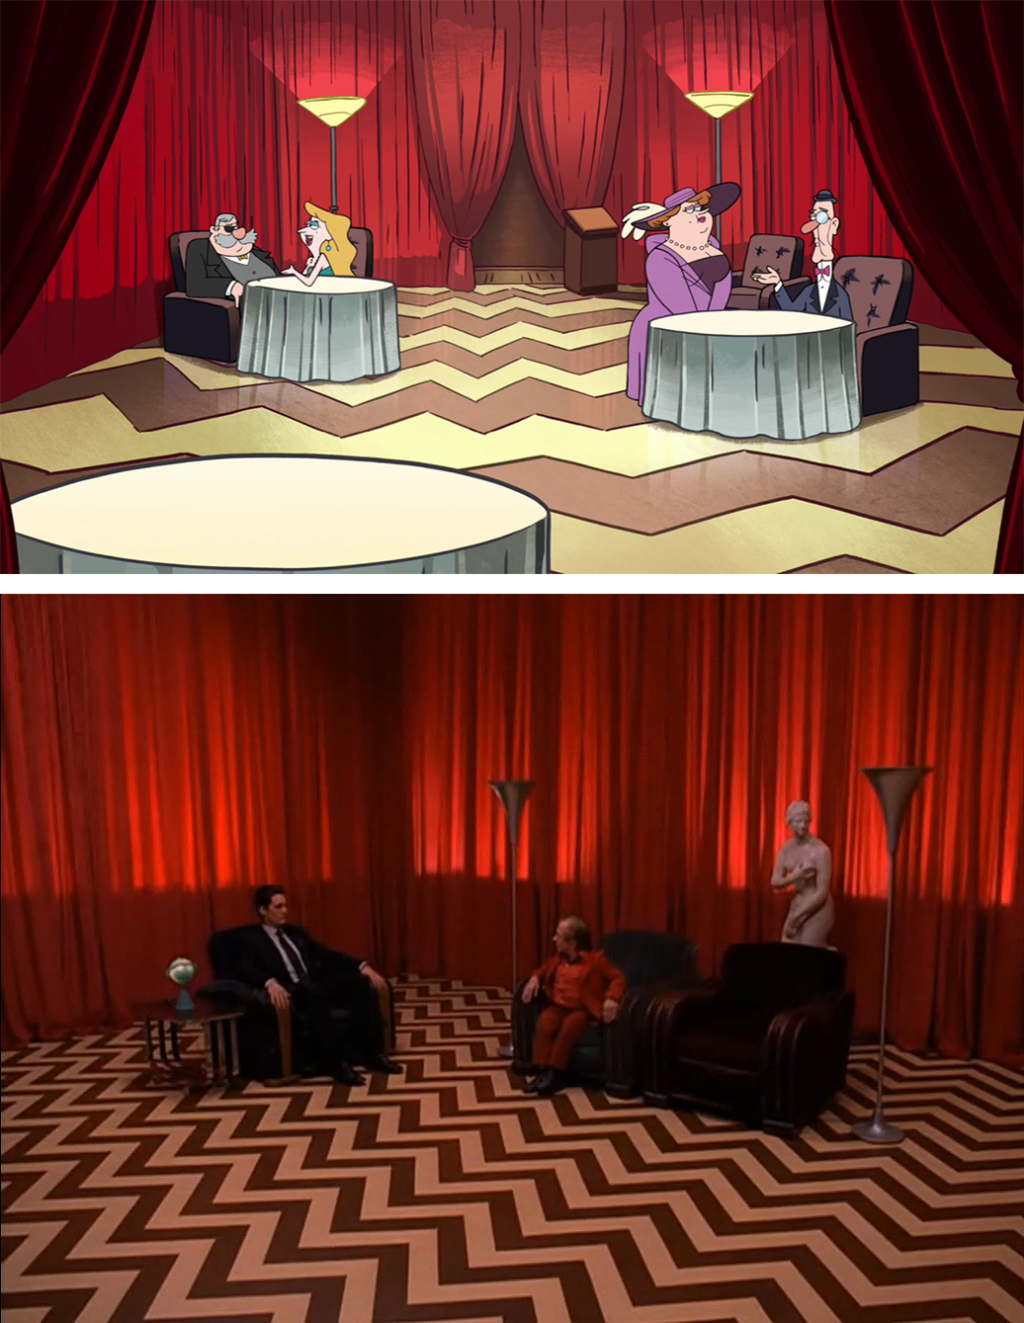 S1e4_twin_peaks_reference.png